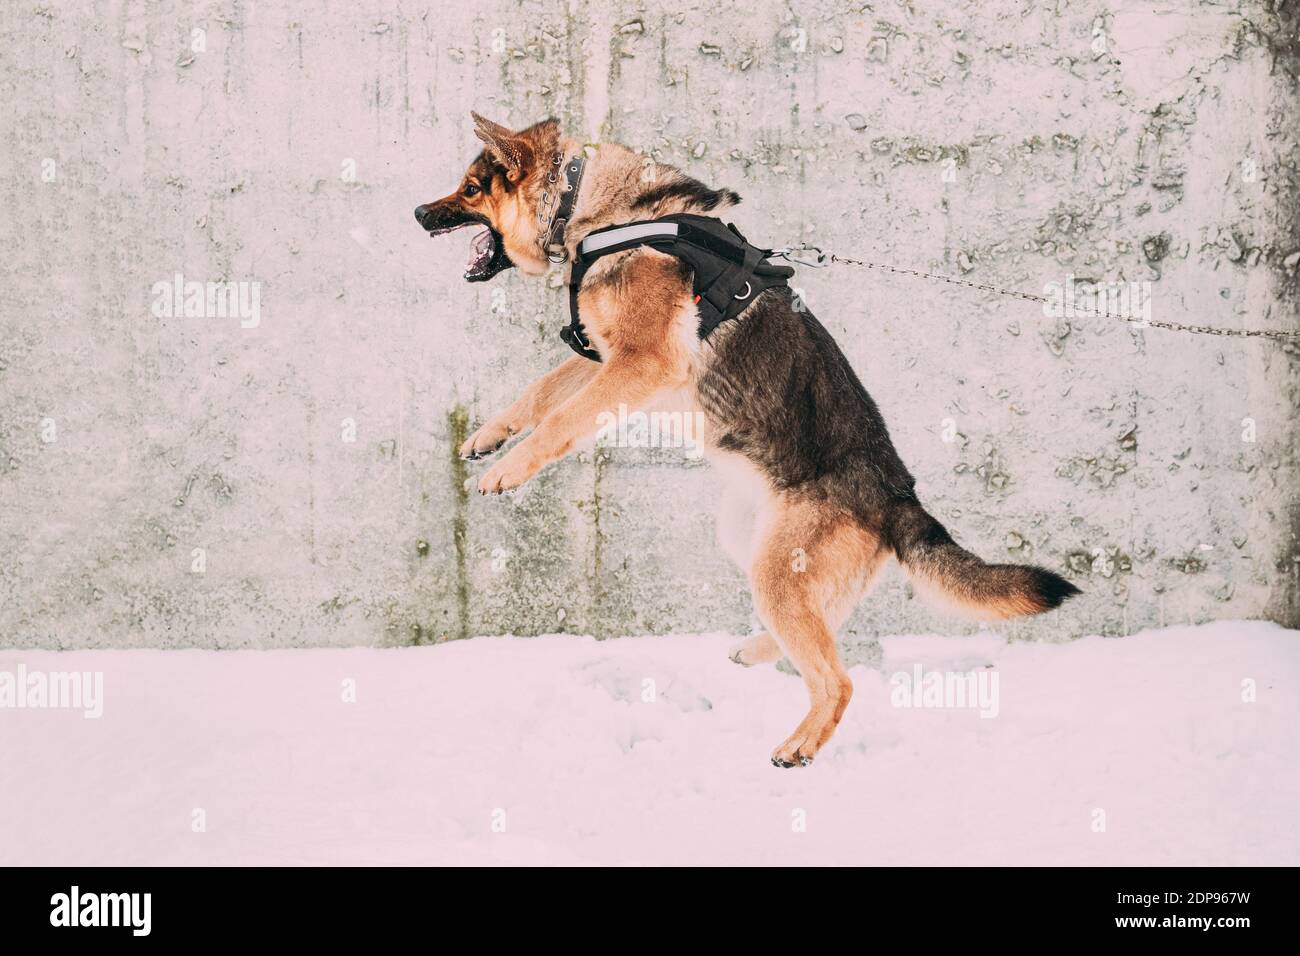 Training Of Purebred German Shepherd Dog In Special Outfit. Alsatian Wolf Dog Jumping During Exercise. Attack And Defence. Winter Snowy Day Stock Photo